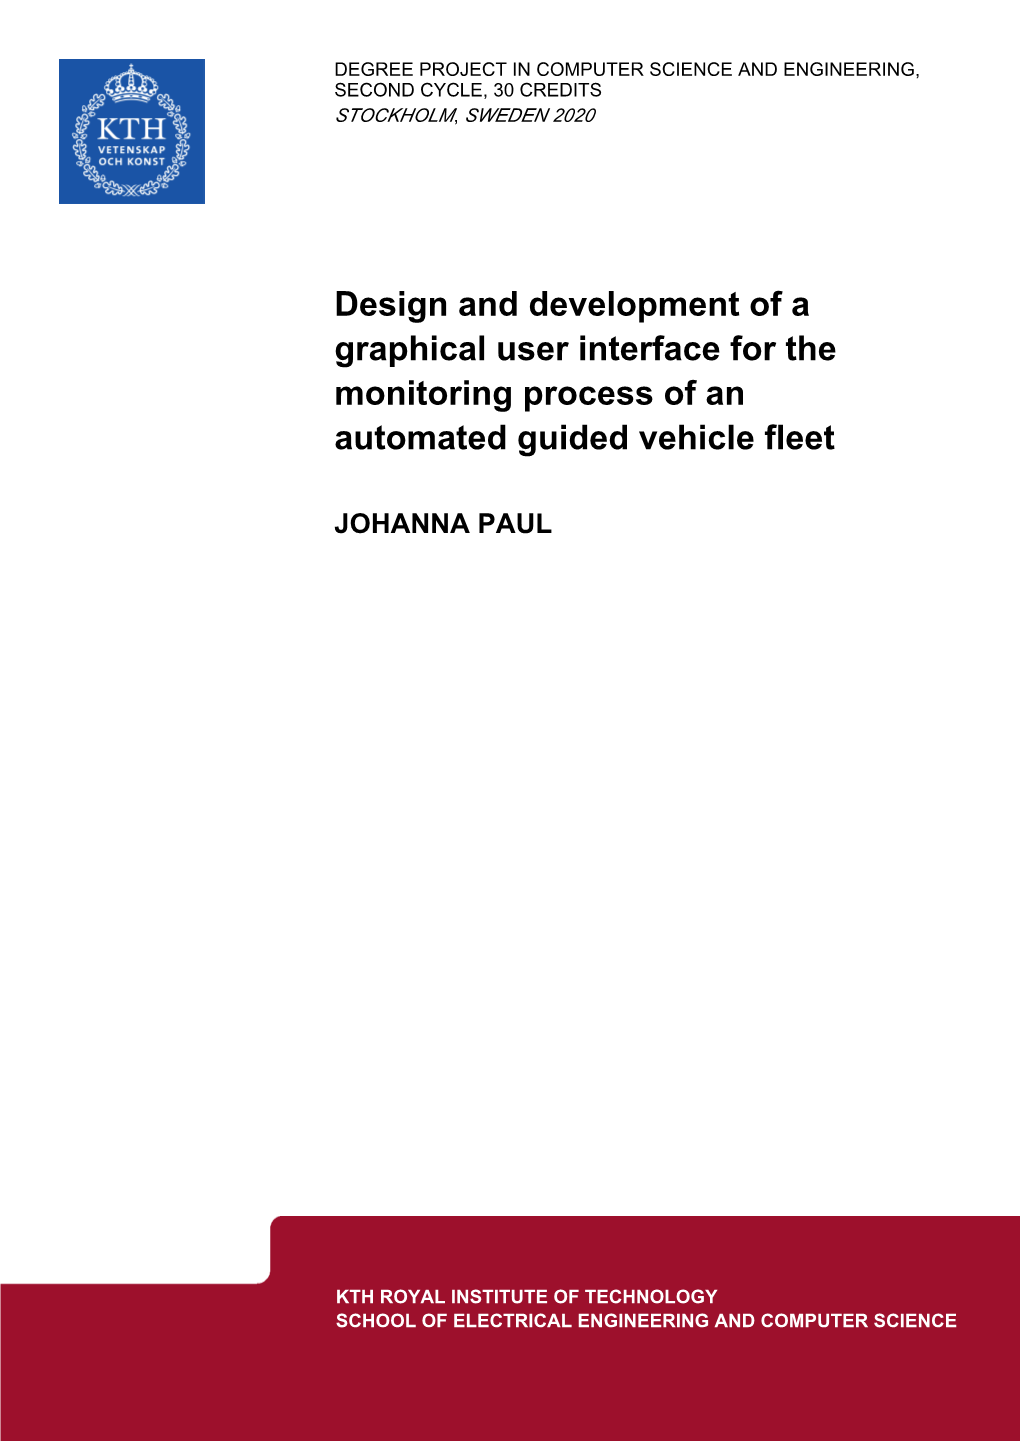 Design and Development of a Graphical User Interface for the Monitoring Process of an Automated Guided Vehicle Fleet